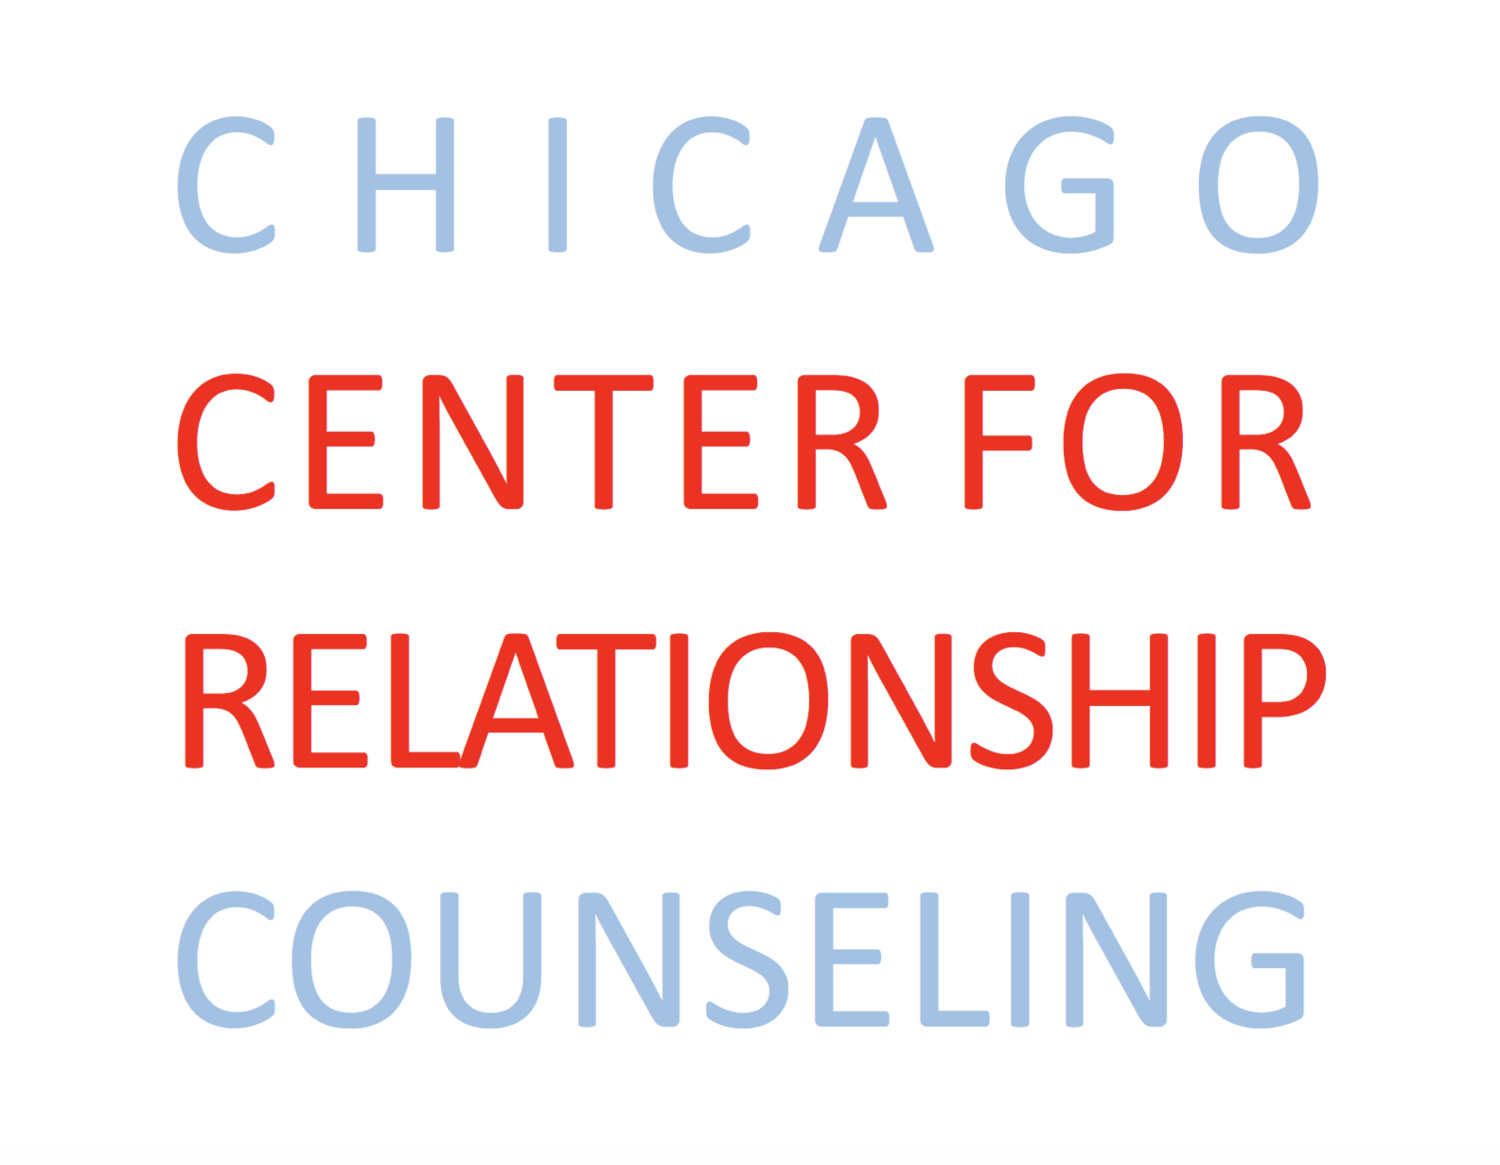 Chicago Center for Relationship Counseling